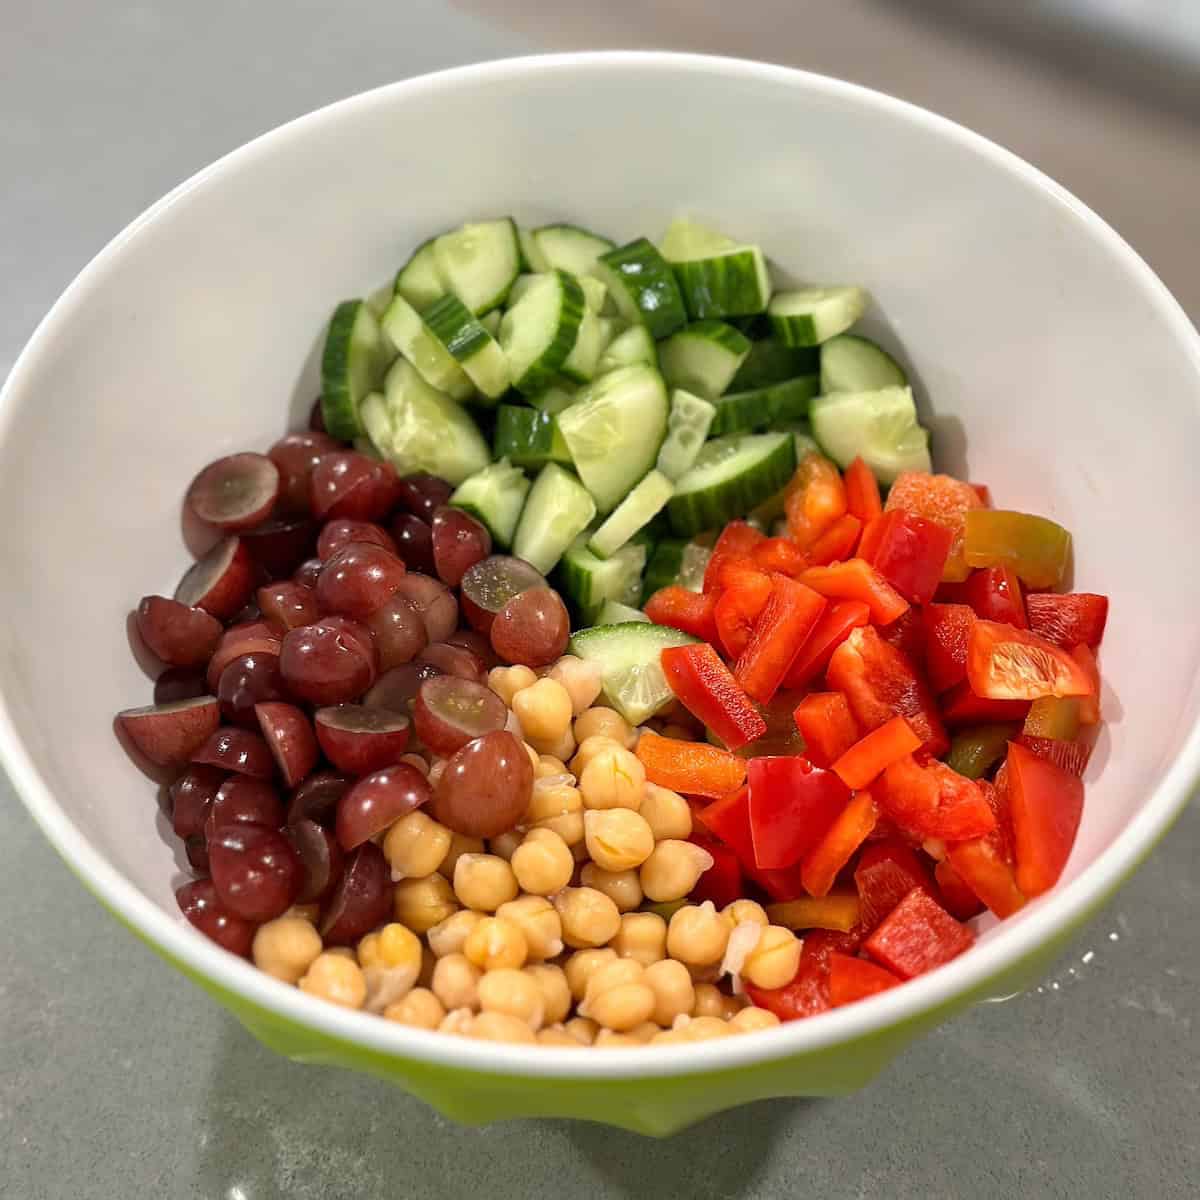 bowl of chickpeas, chopped cucumbers and red bell peppers, and halved grapes